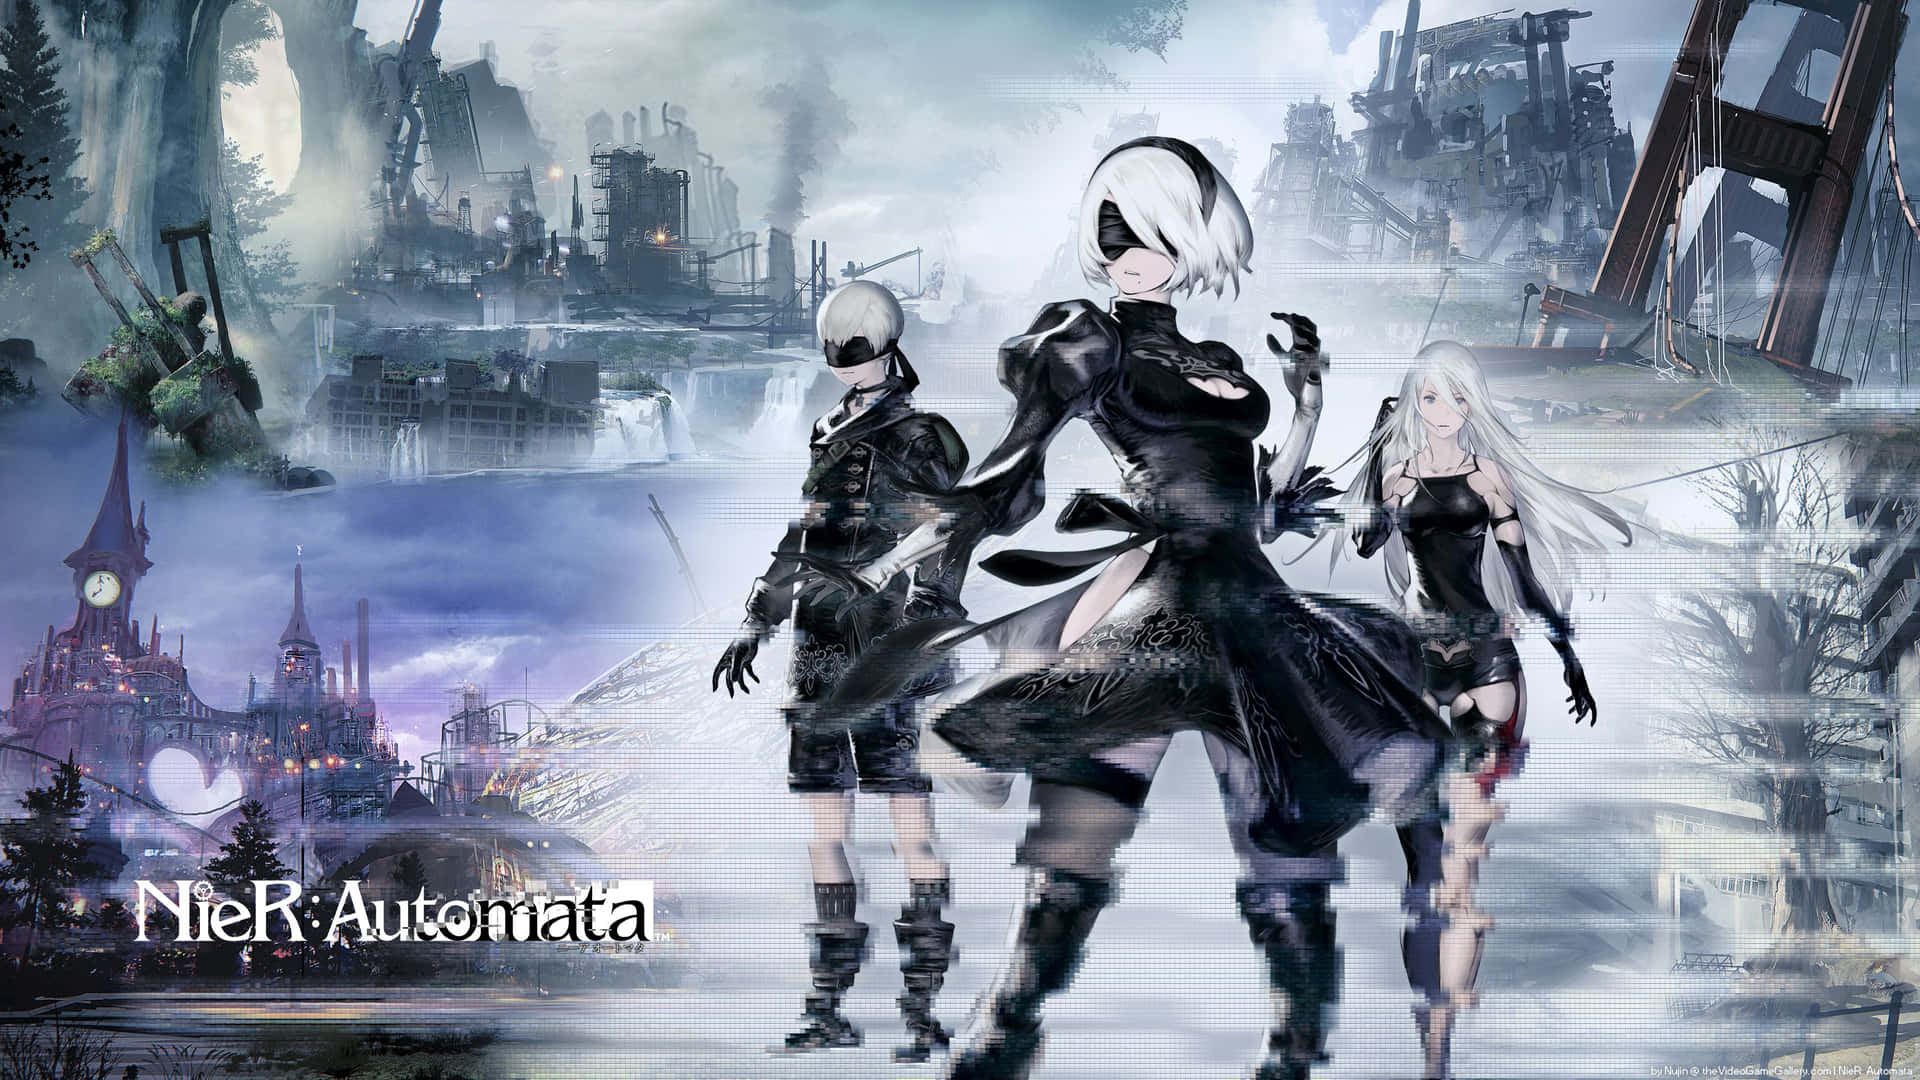 Join 2b in her journey of saving humanity